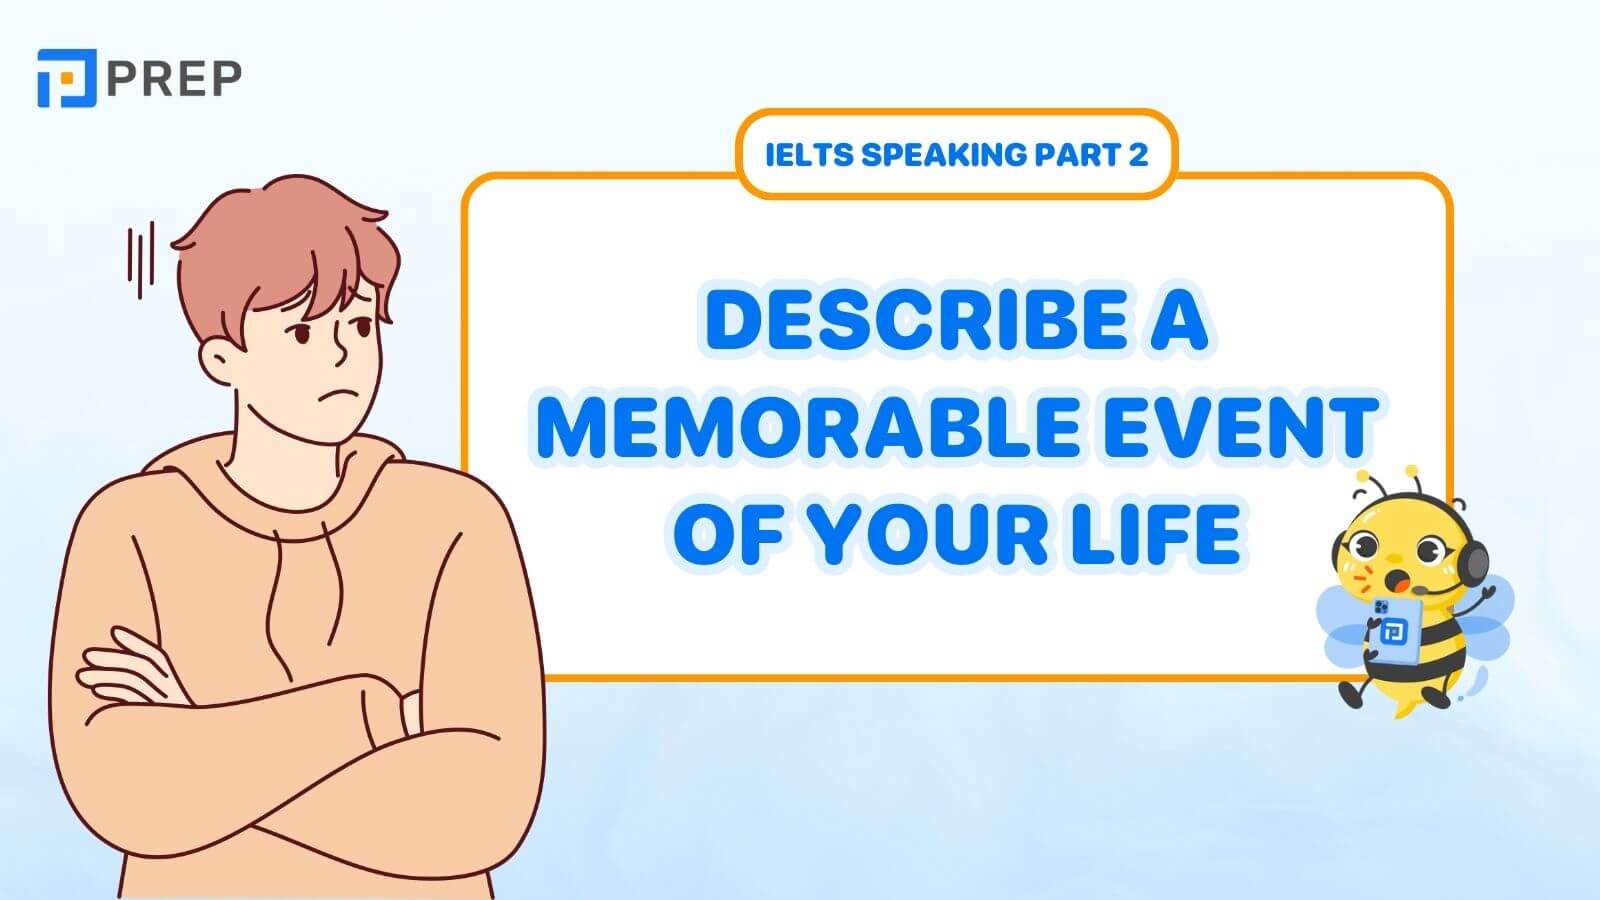 Describe a memorable event of your life